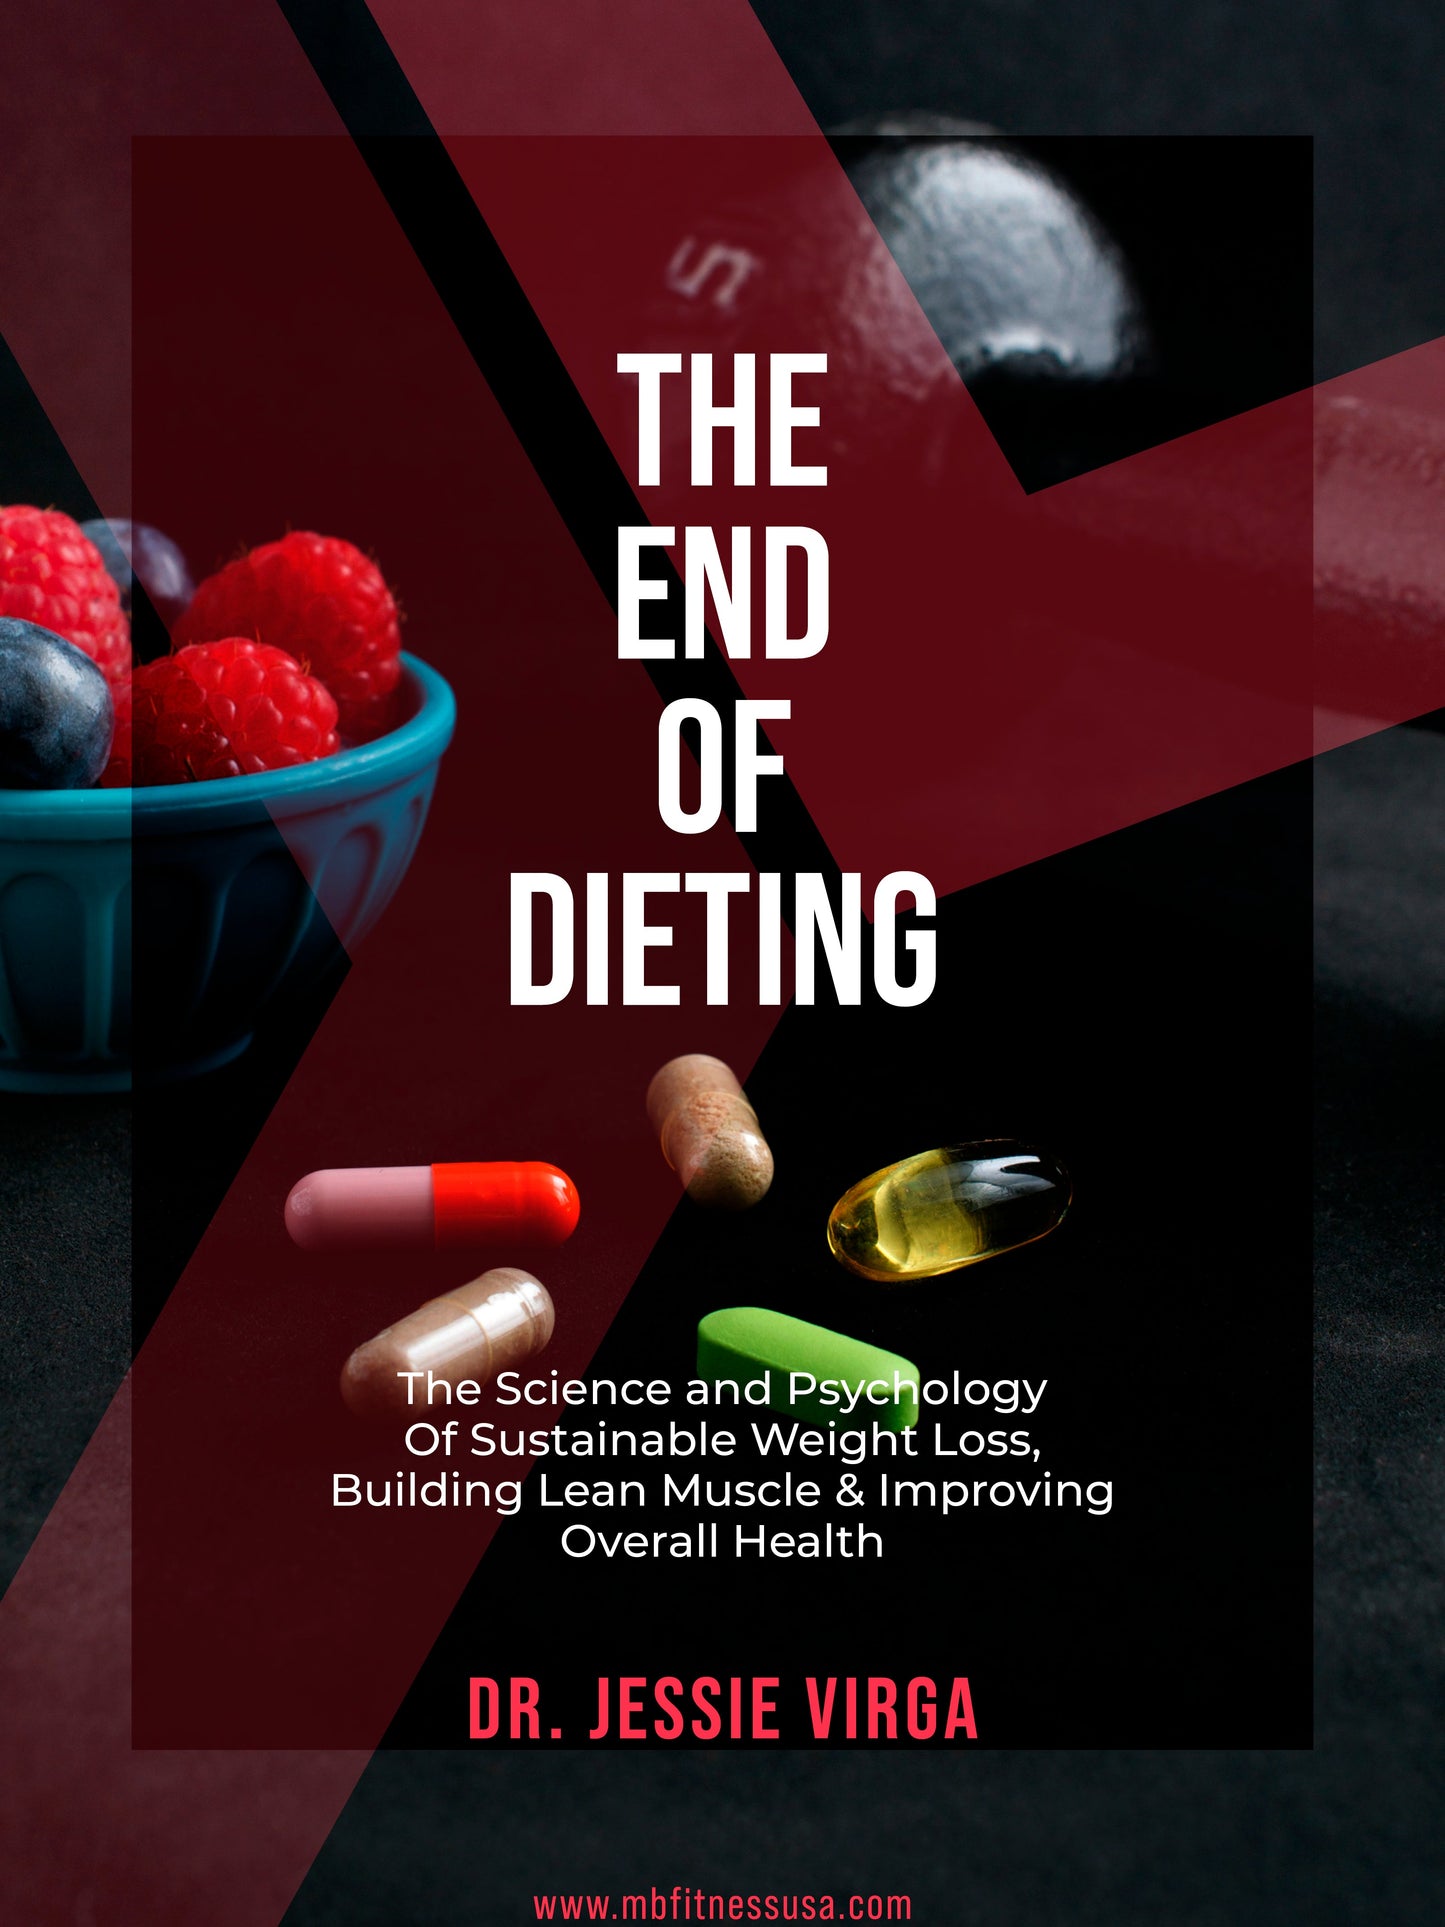 The End of Dieting: The Science and Psychology Of Sustainable Weight Loss, Building Lean Muscle & Improving Overall Health [@alittlesavage edition]